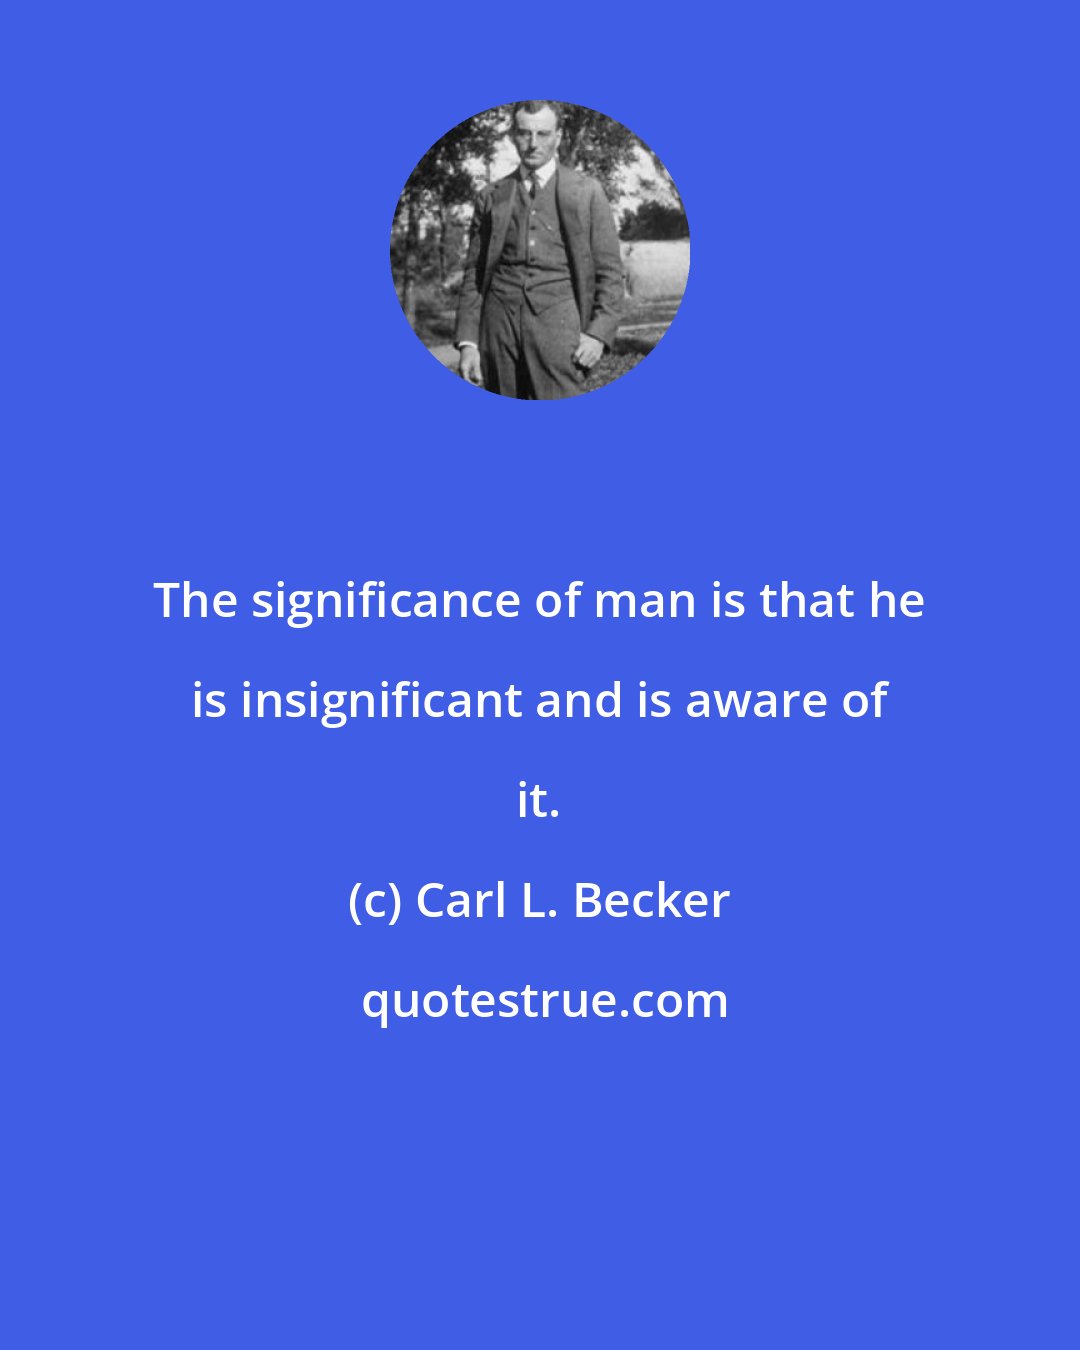 Carl L. Becker: The significance of man is that he is insignificant and is aware of it.